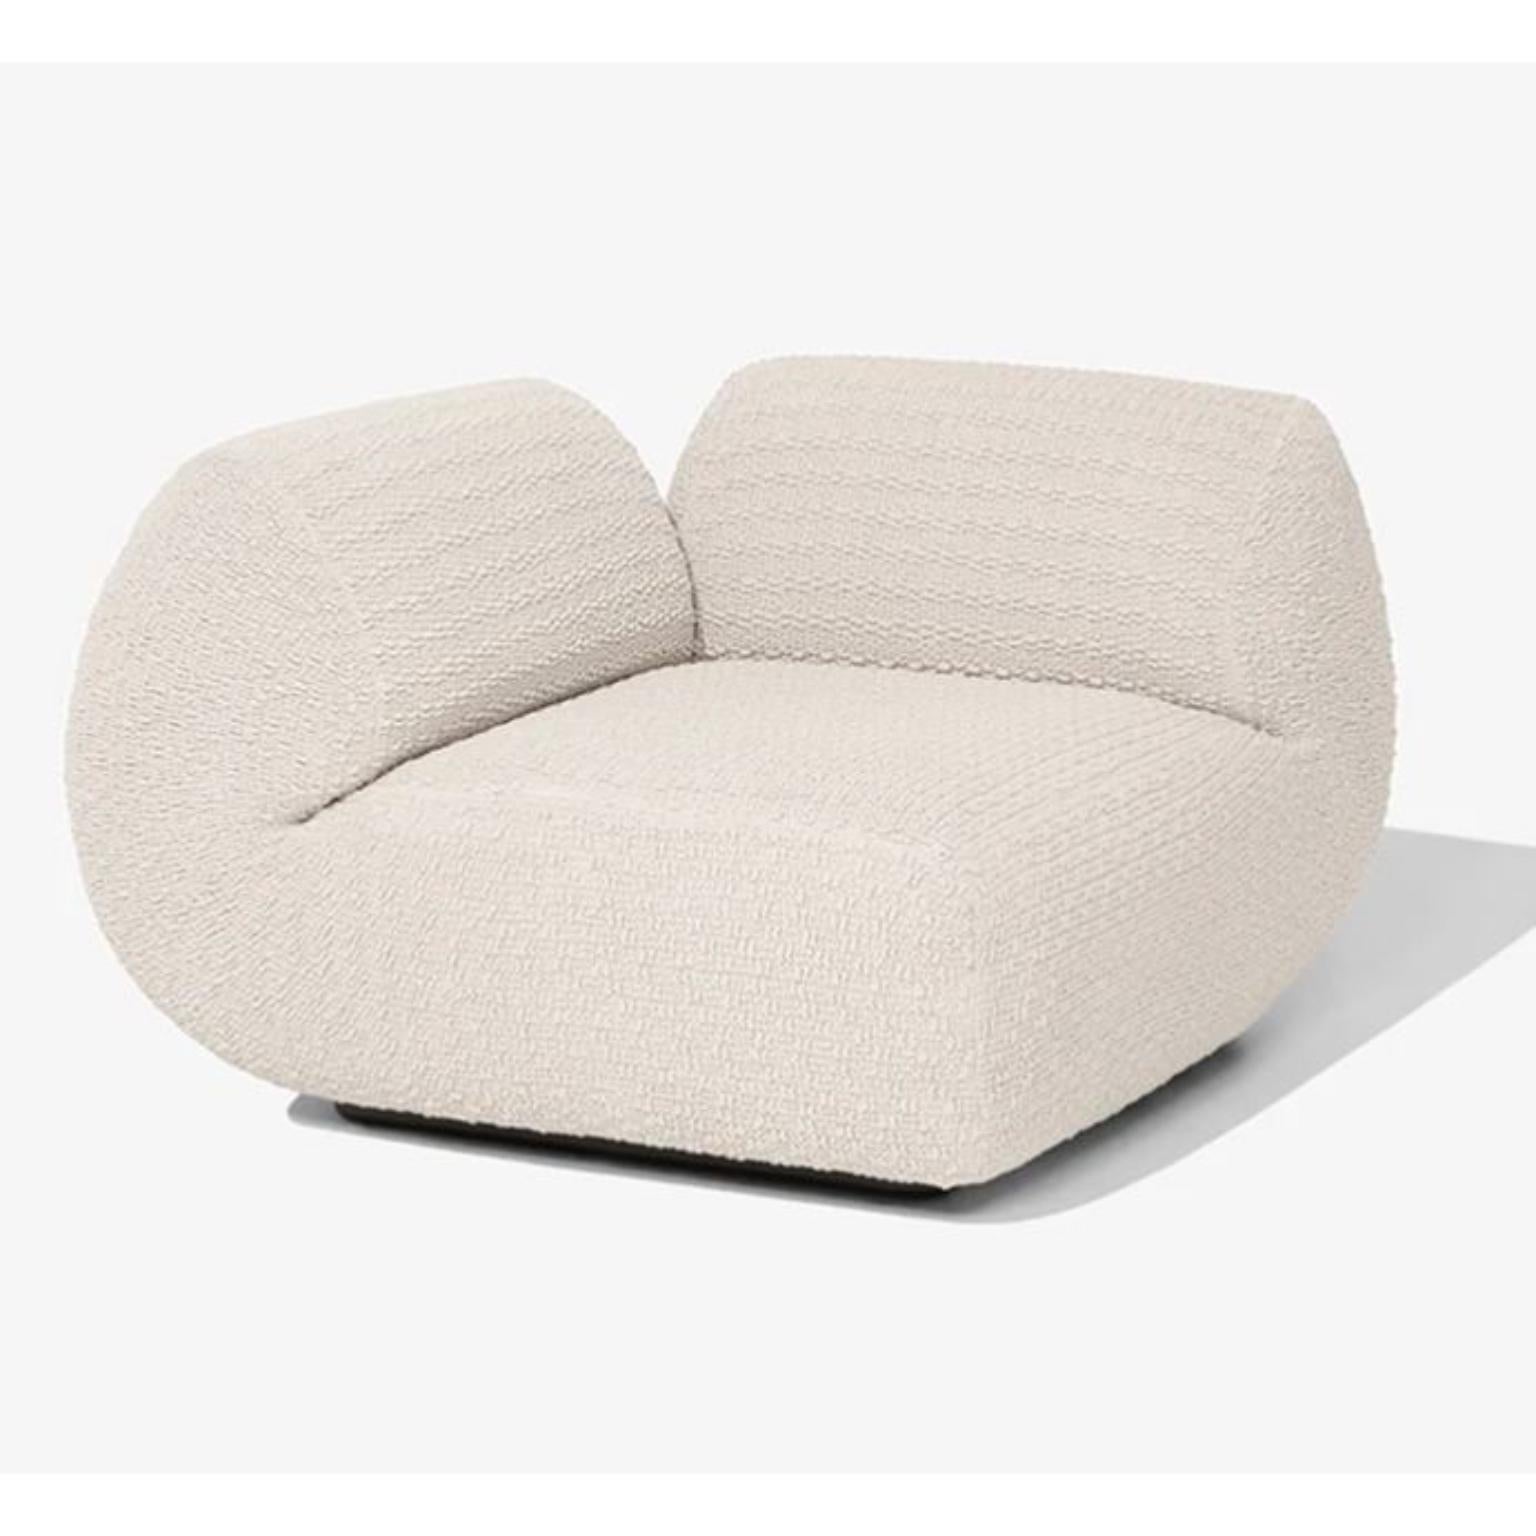 Dobra Module Corner Sofa by Wentz
Dimensions: D 110 x W 110 x H 70 cm
Materials: Modular sofa with wood structure, elastic straps, hyper-soft foam and WE—KNIT covering (70% Recycled PET + 30% Elastane). Base in black painted wood and EVA botton